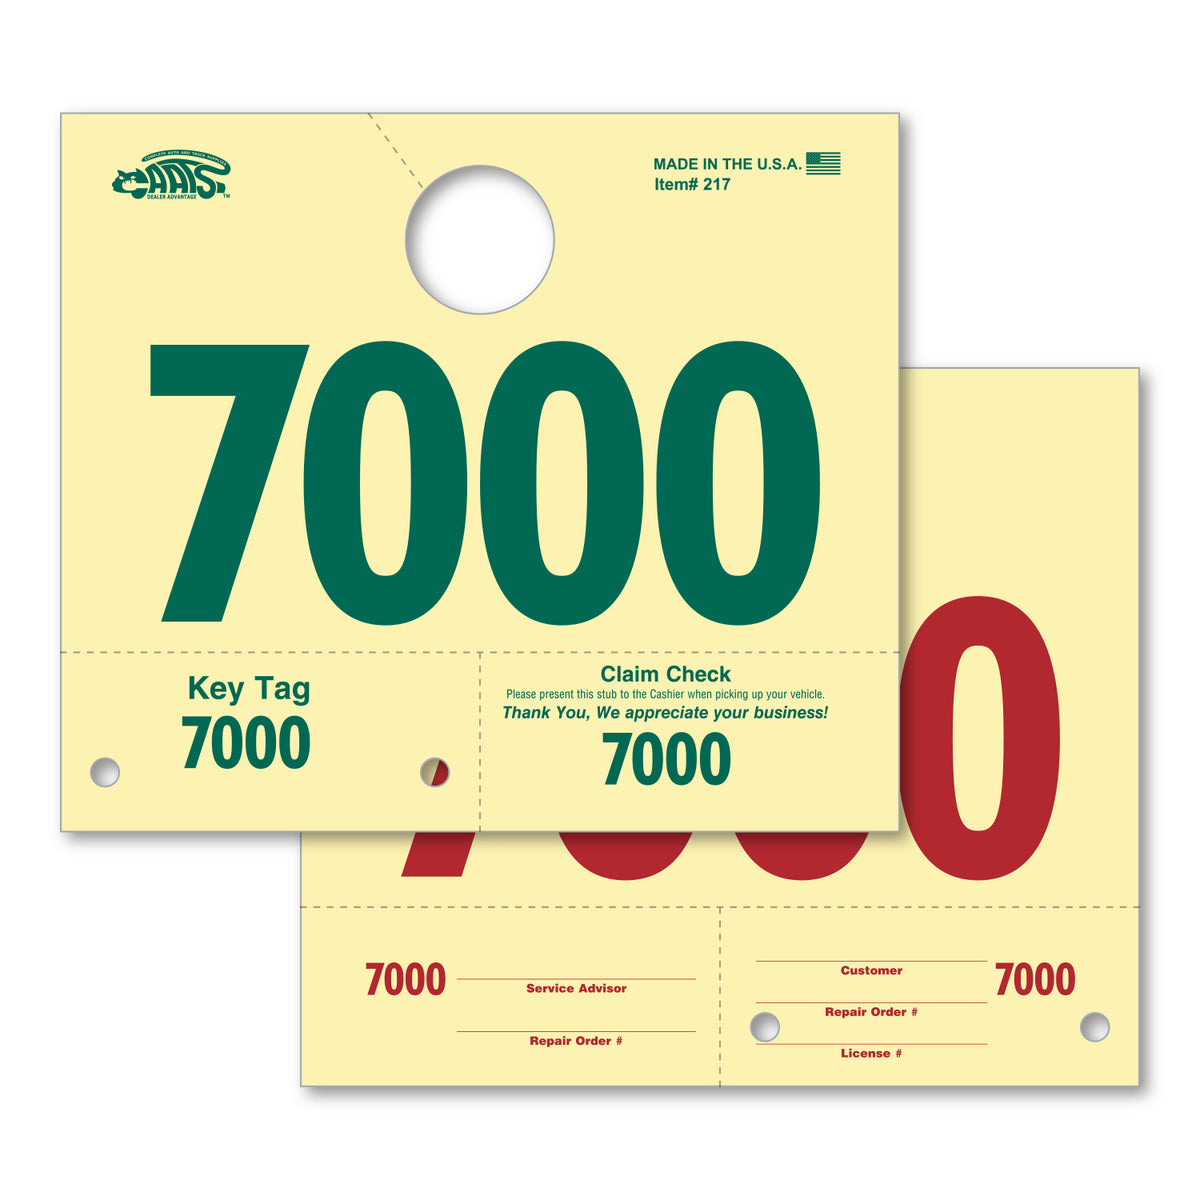 A service dispatch tag that hangs on a rearview mirror. Has the number &quot;7000&quot; printed on it. www.fllywheelnw.com